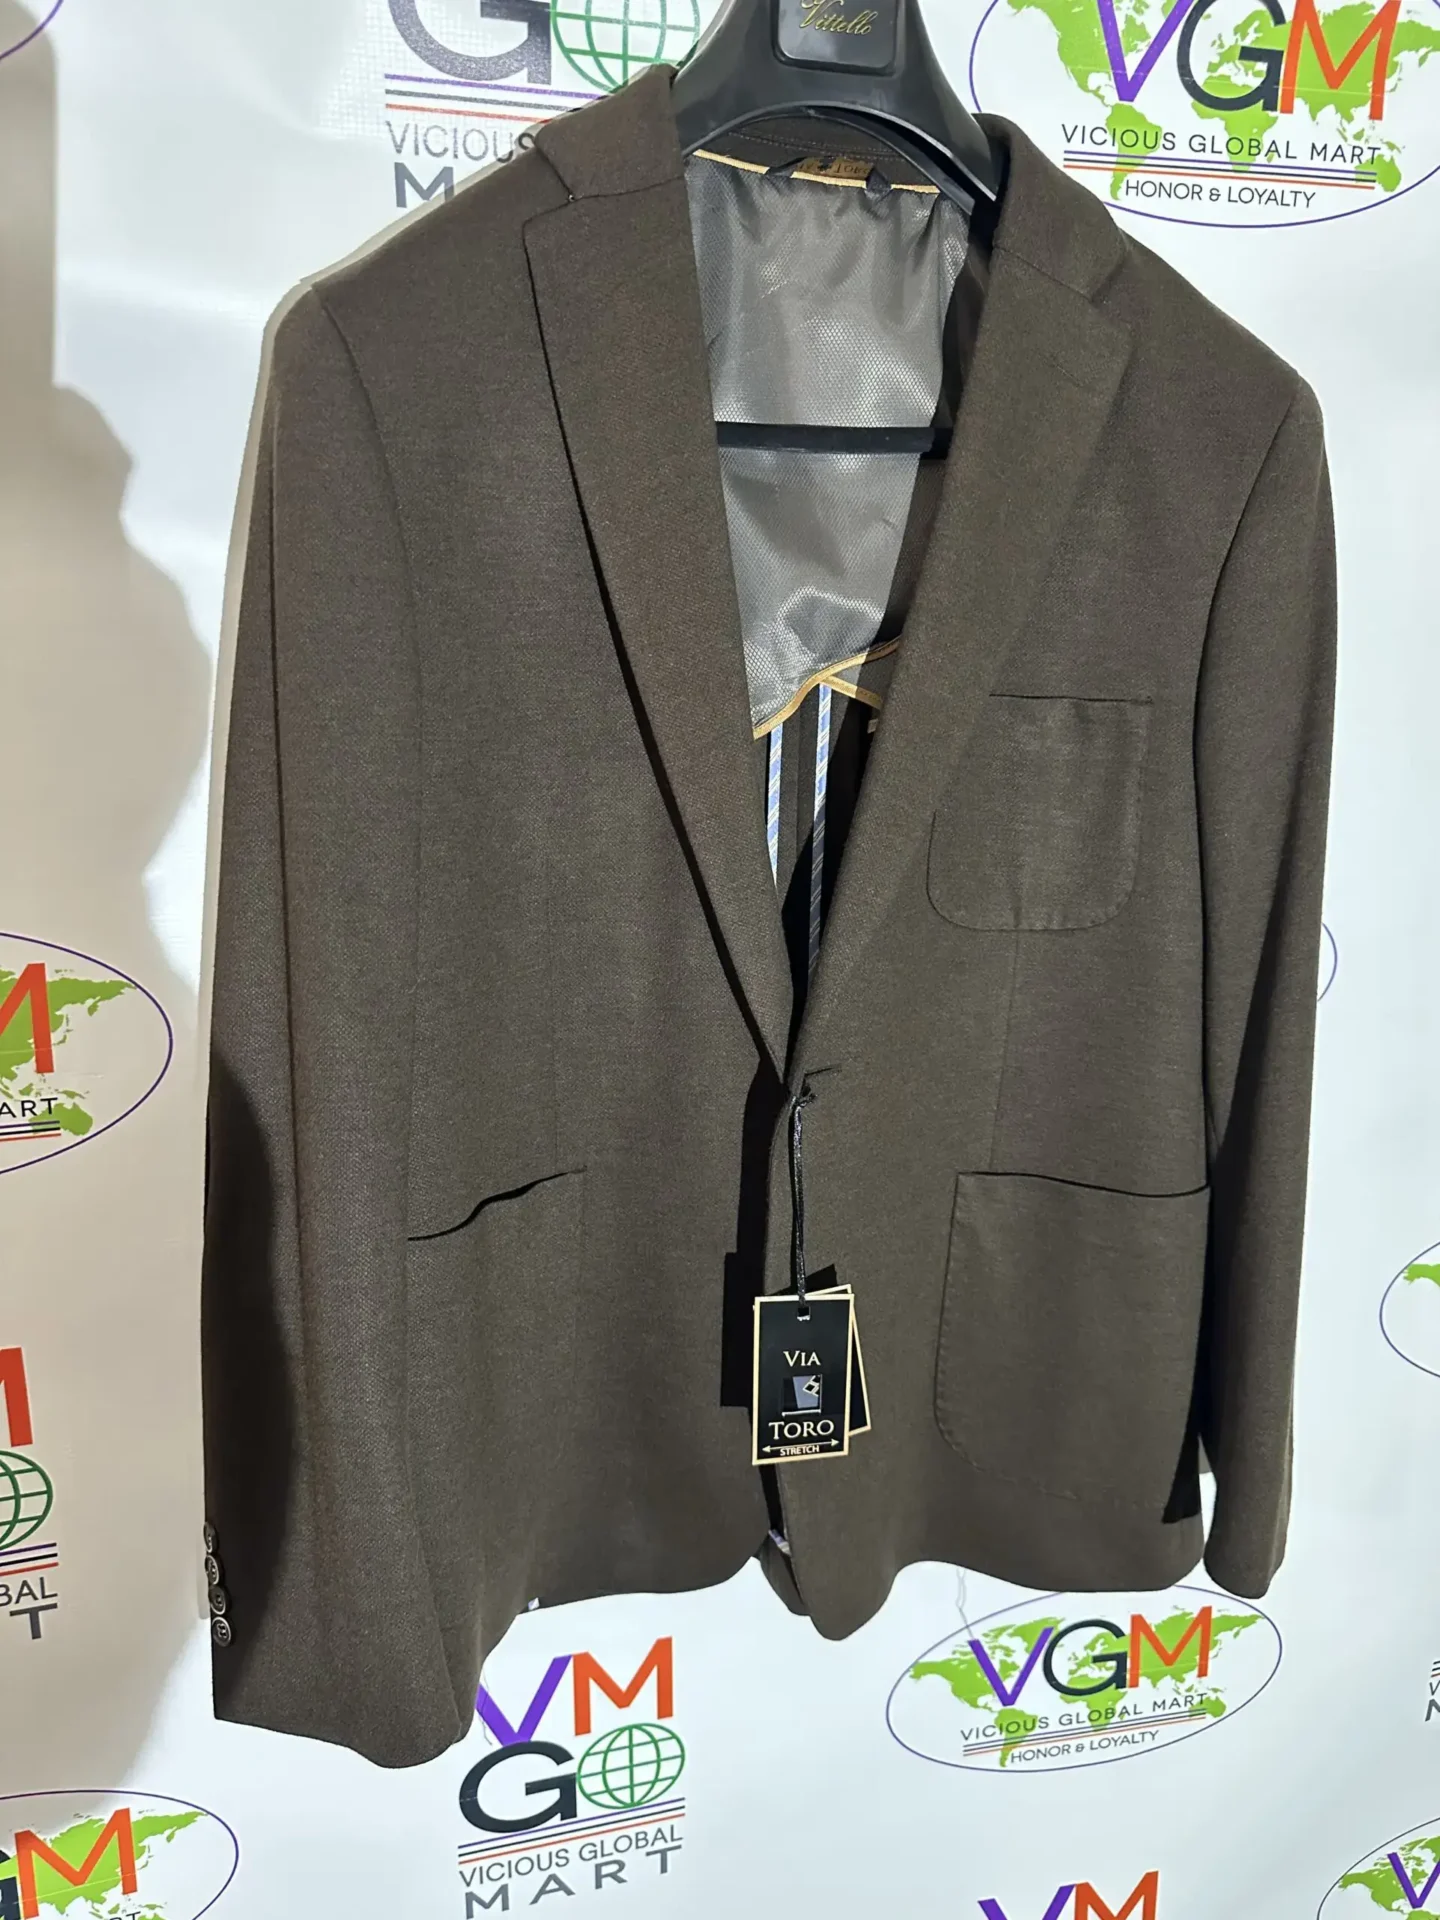 A gray blazer jacket hanging on a hanger.